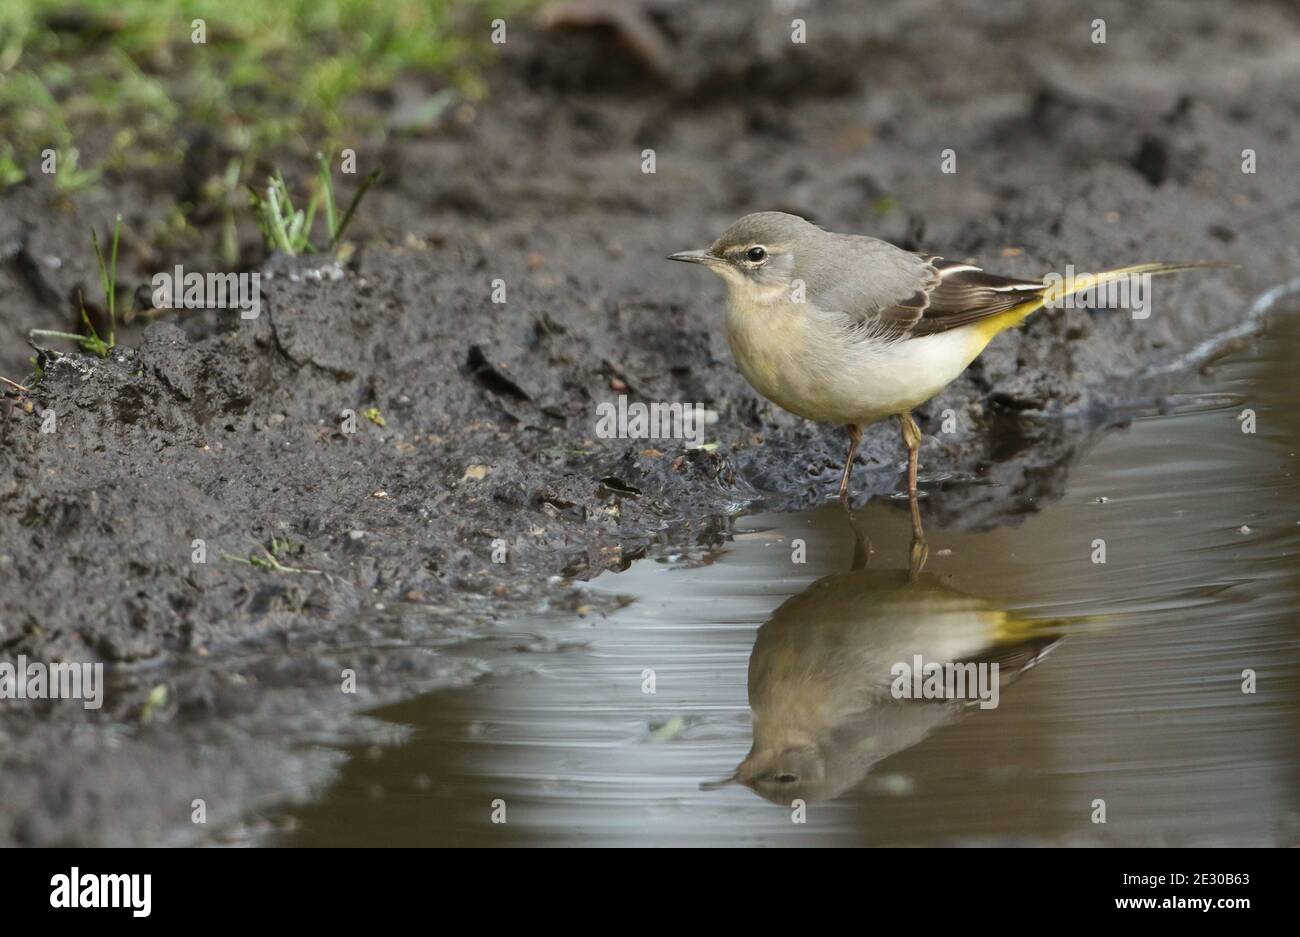 A beautiful Grey Wagtail, Motacilla cinerea, searching for insects along the edge of a puddle on a dirt track in winter. It's reflection can be seen i Stock Photo